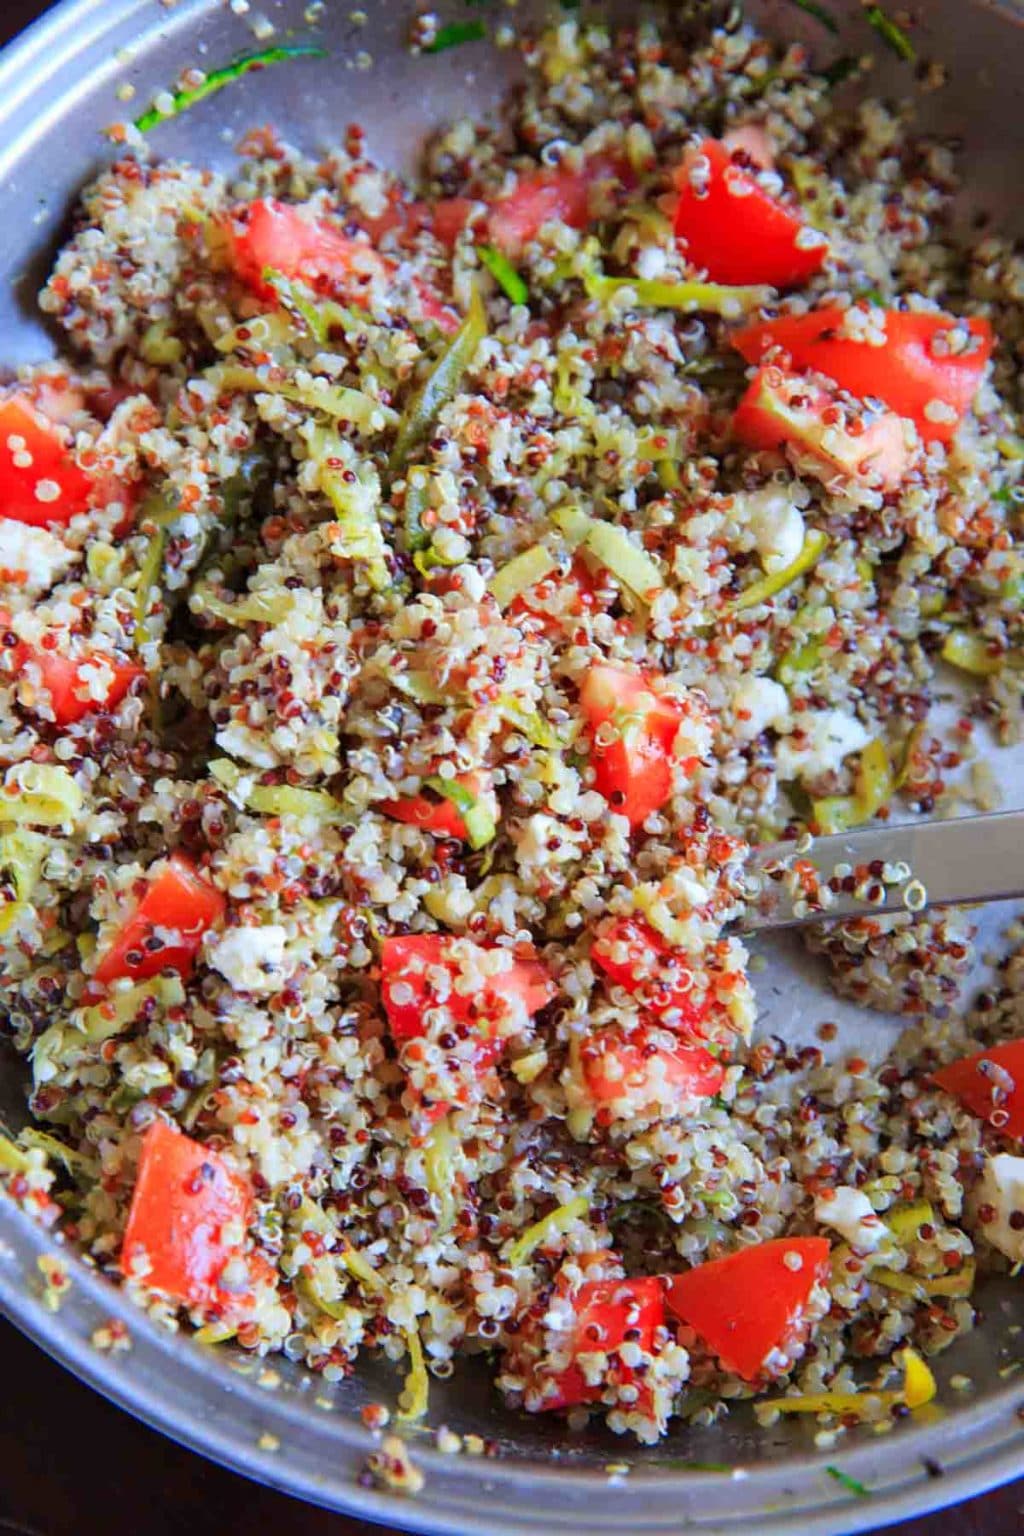 Spiralized Zucchini Quinoa Tomato Salad. Eat as a side or a meal, cold or hot! Healthy, vegetarian, delicious.